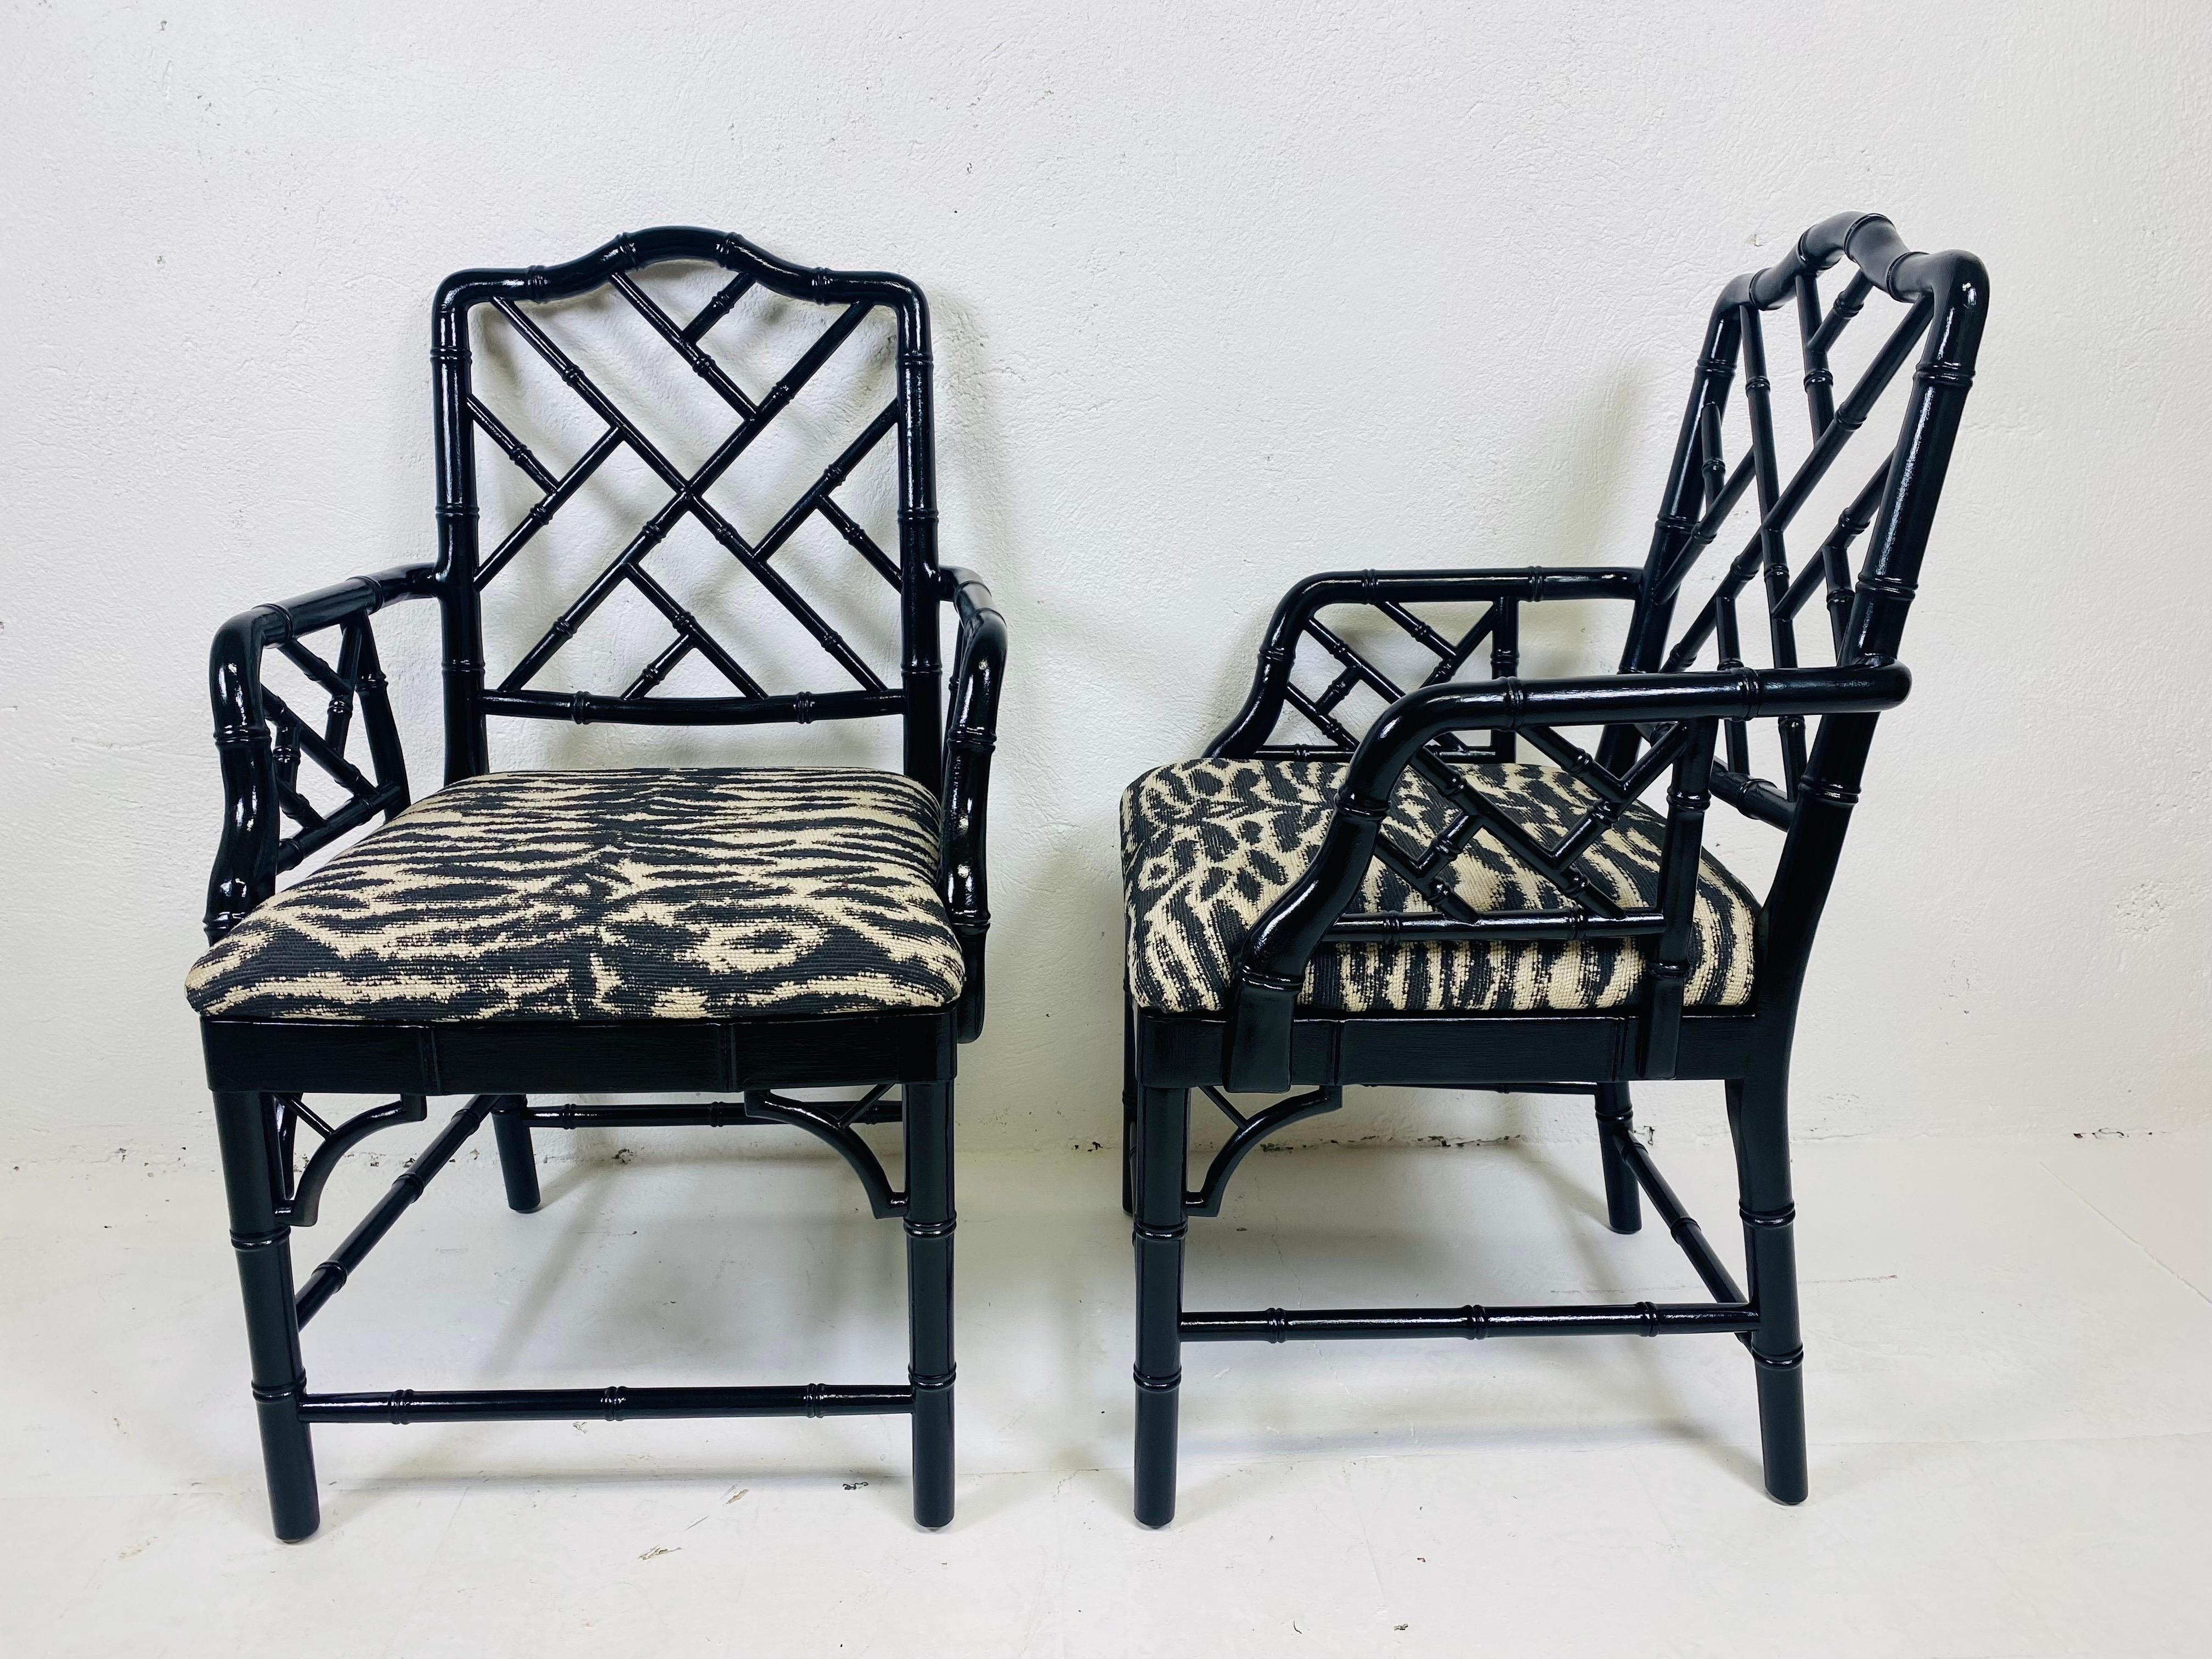 This is a pair of regency inspired faux bamboo black Lacquered arm chairs. These faux bamboo arm chairs have been lacquered with a glossy black and newly upholstered and a tiger pattern fabric.